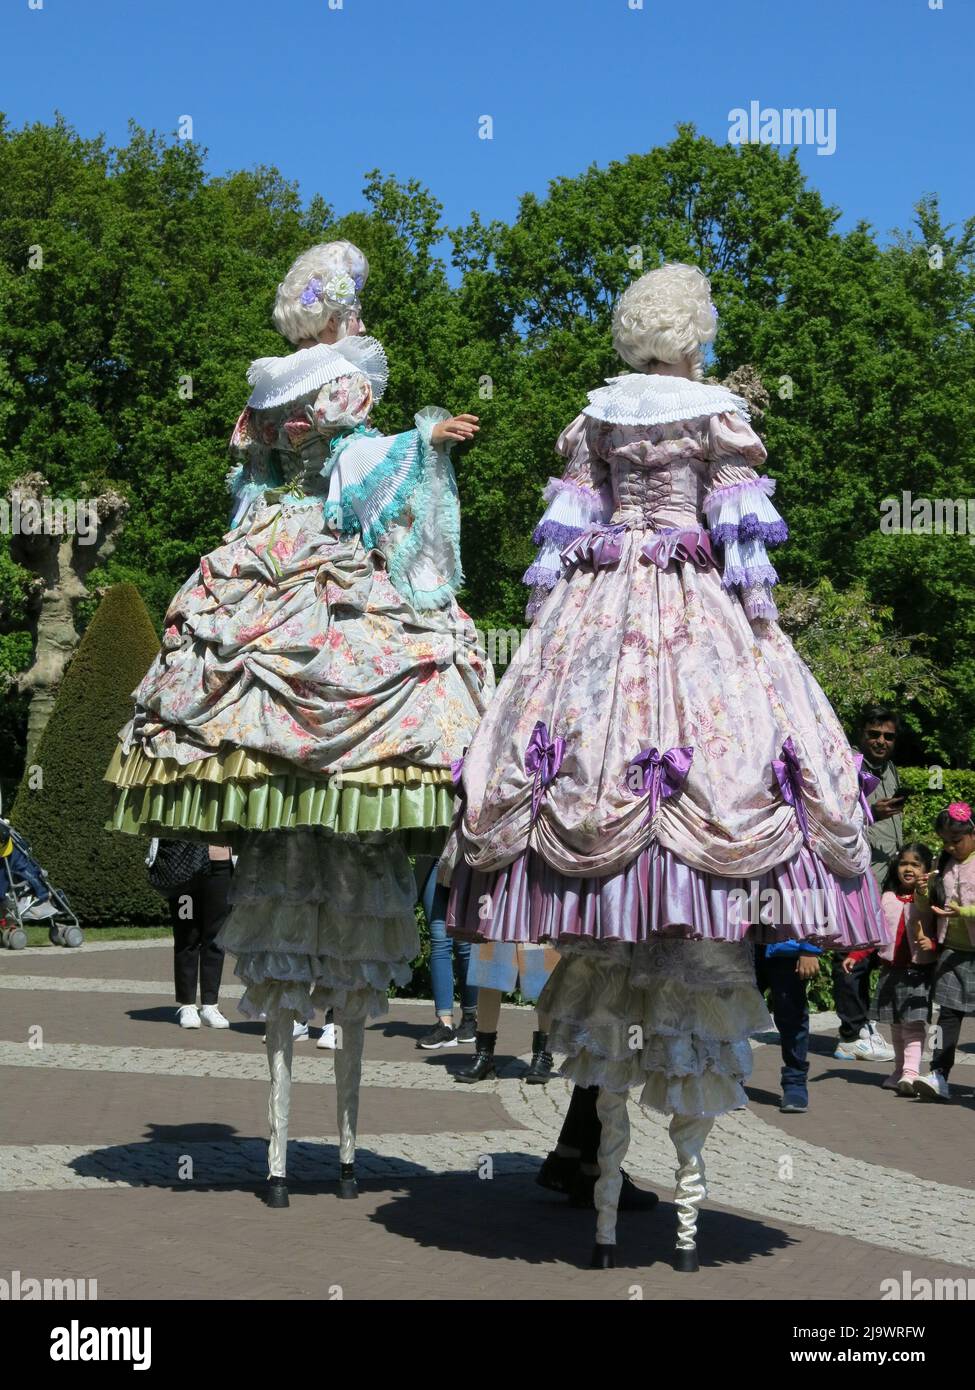 Entertainment for the crowds when two girls on tall stilts, wearing historical costume & wigs walk through the gardens at Keukenhof 2022. Stock Photo